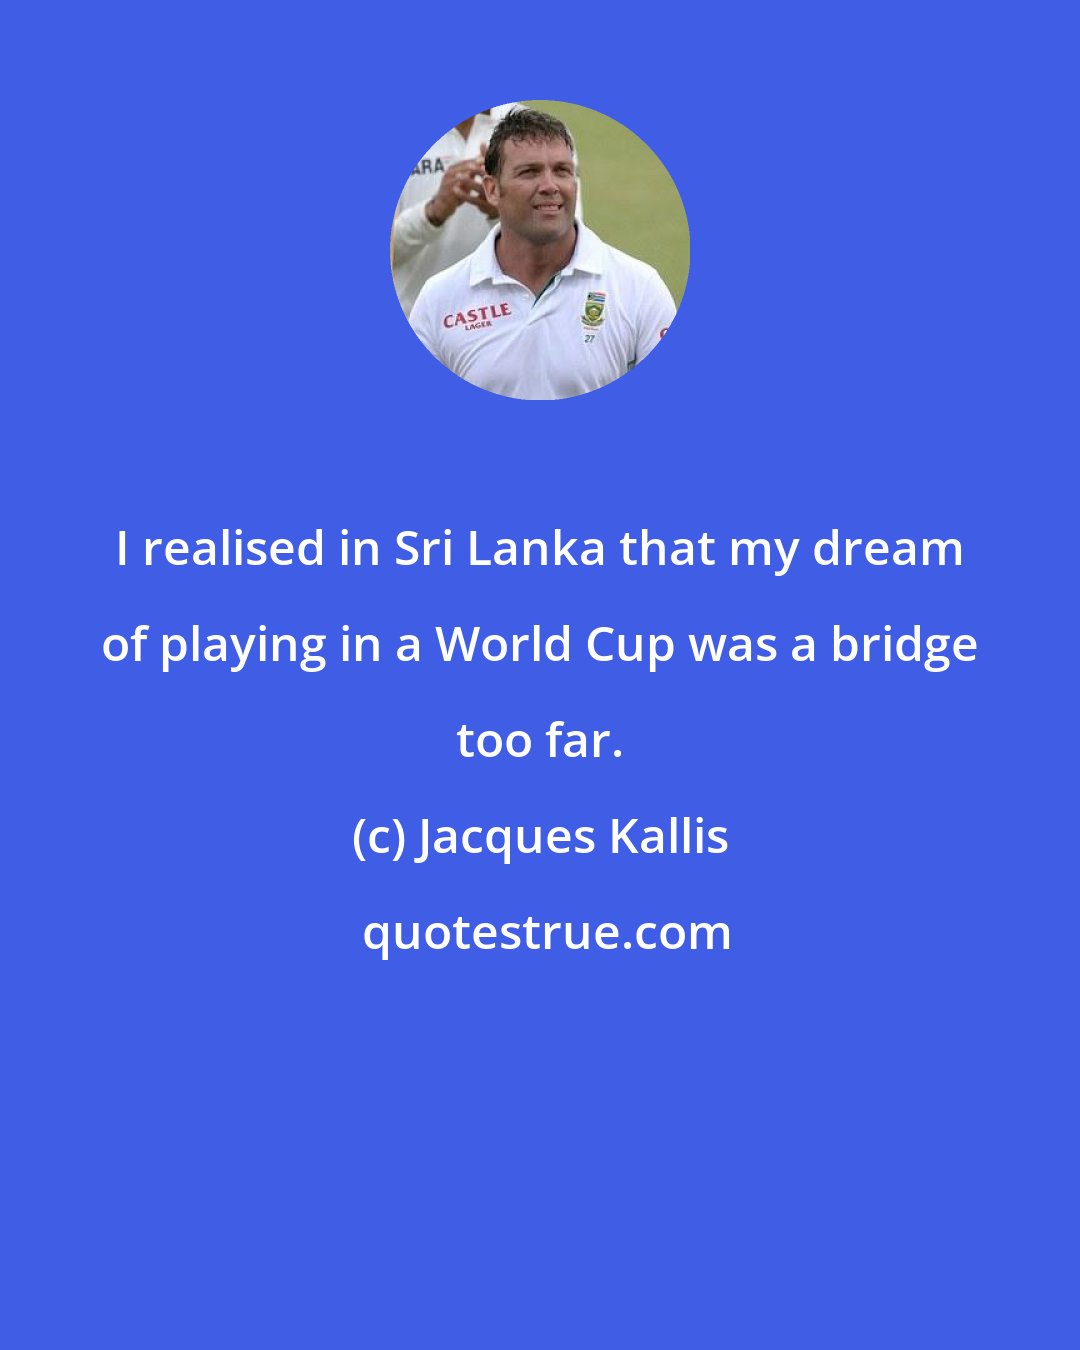 Jacques Kallis: I realised in Sri Lanka that my dream of playing in a World Cup was a bridge too far.